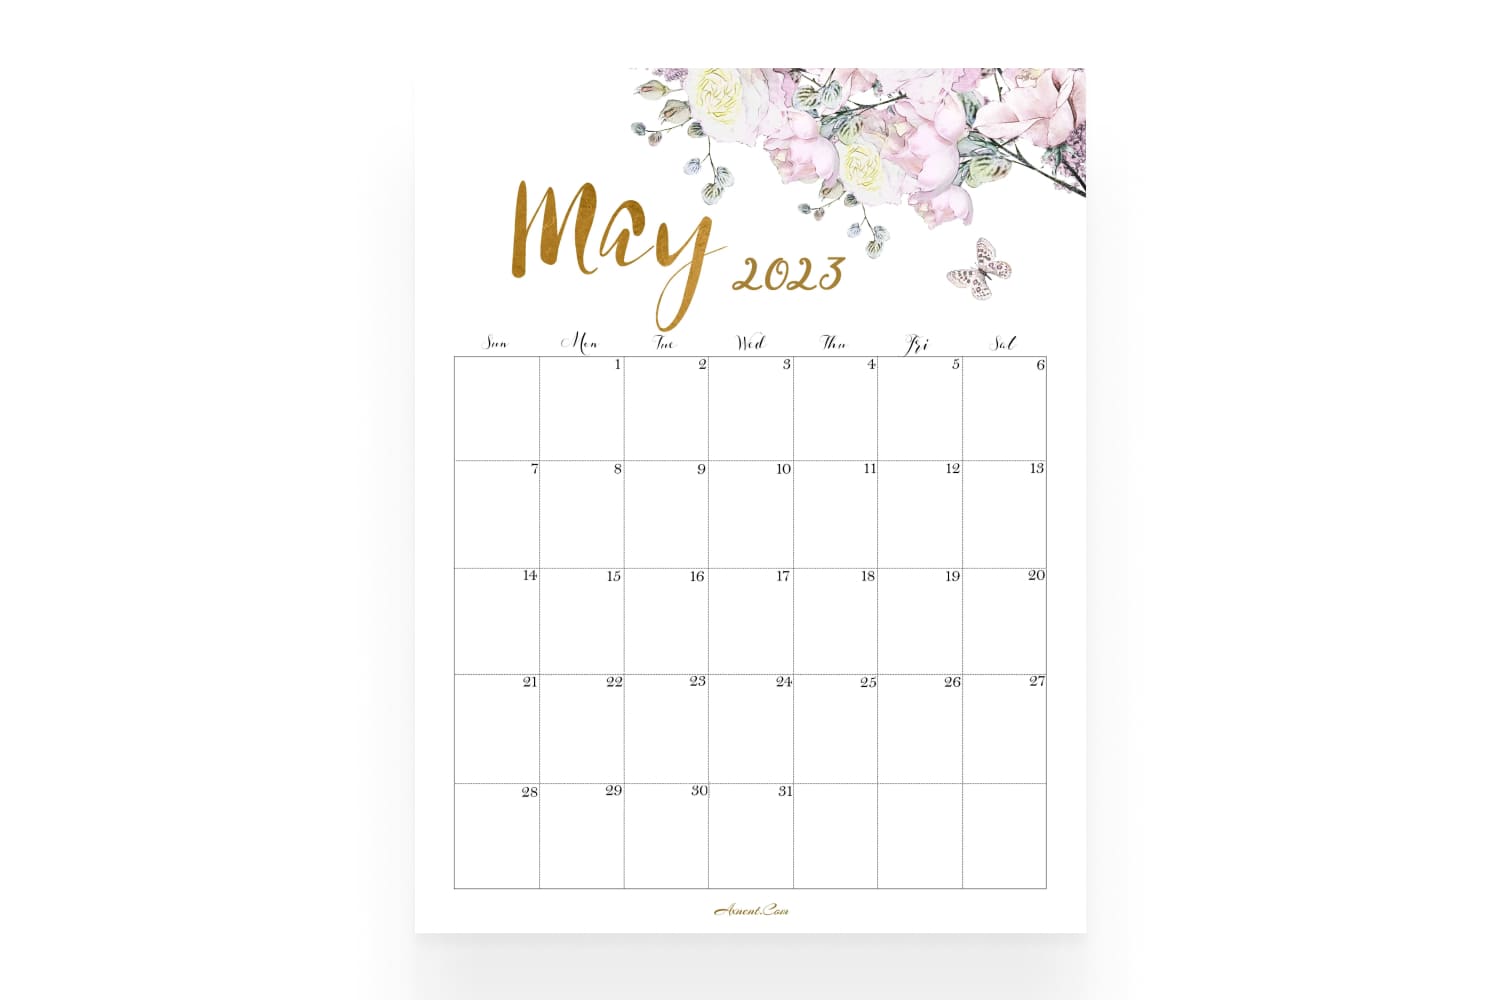 May calendar with white background and illustration with flowers on top.